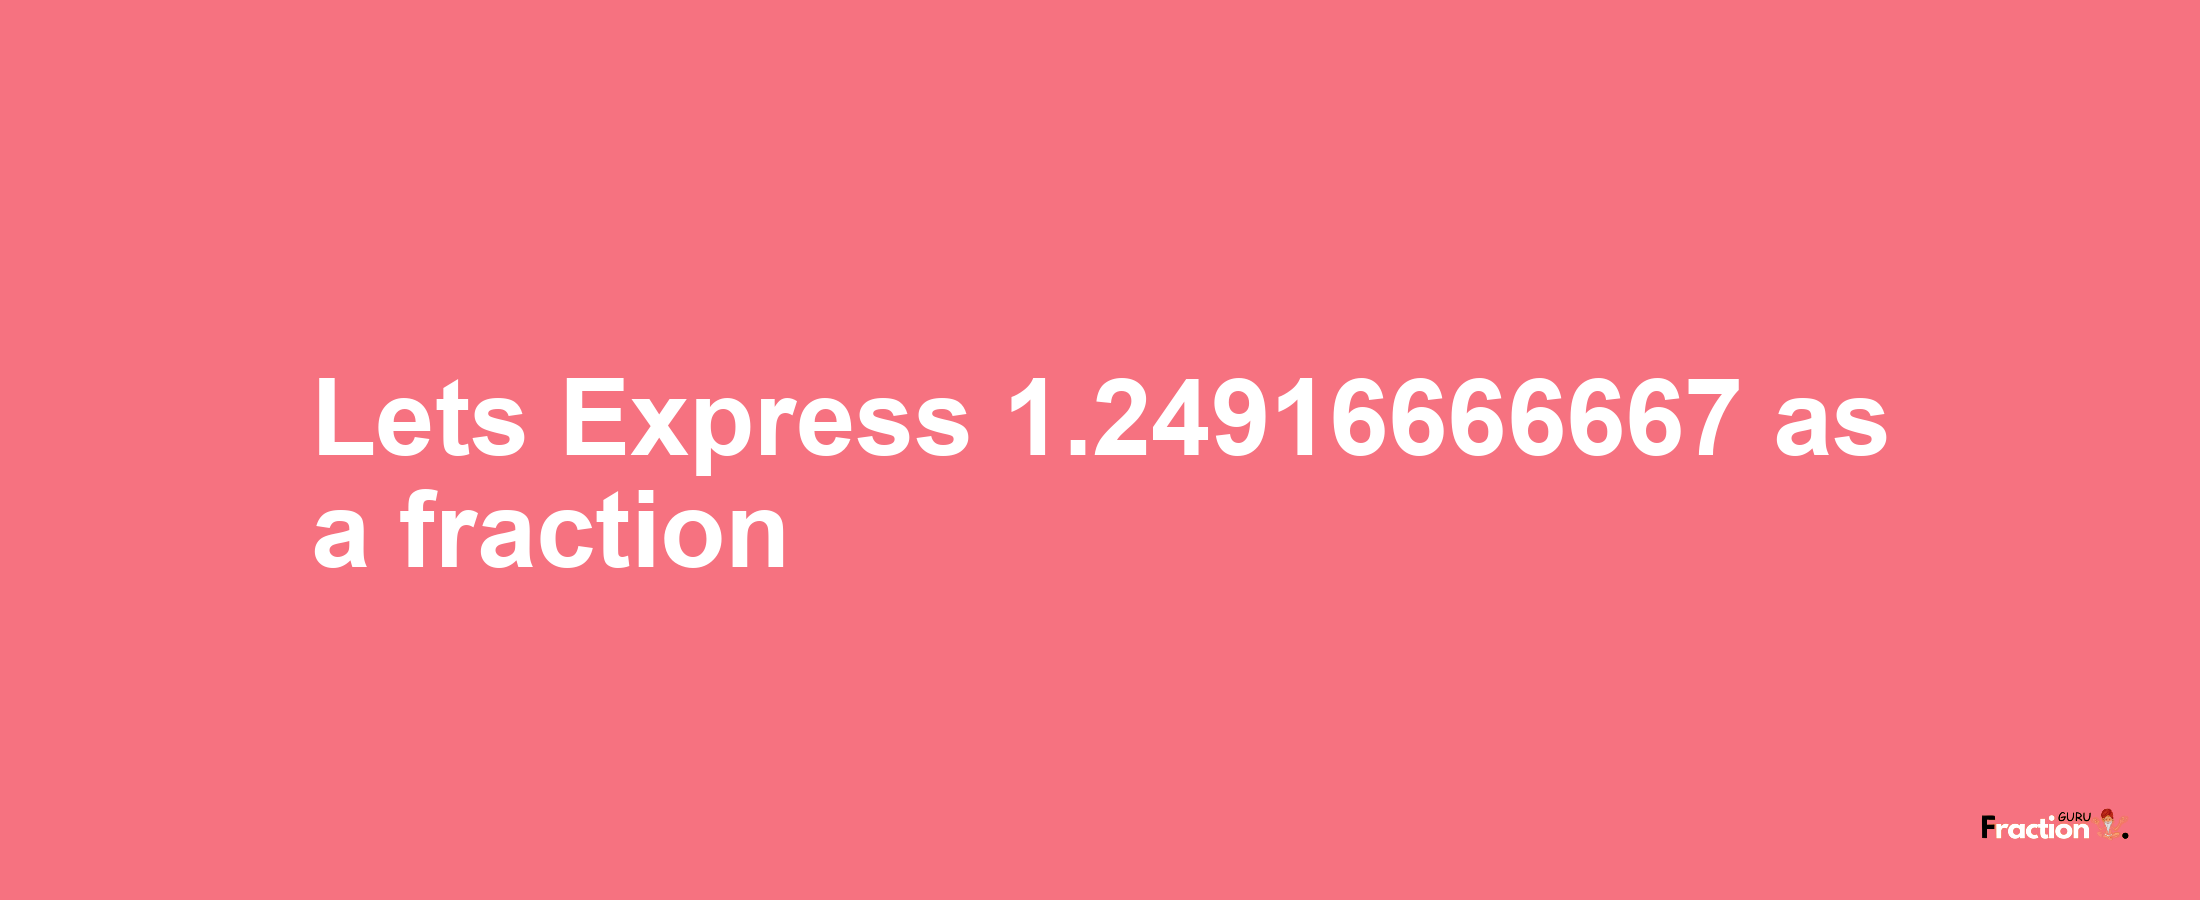 Lets Express 1.24916666667 as afraction